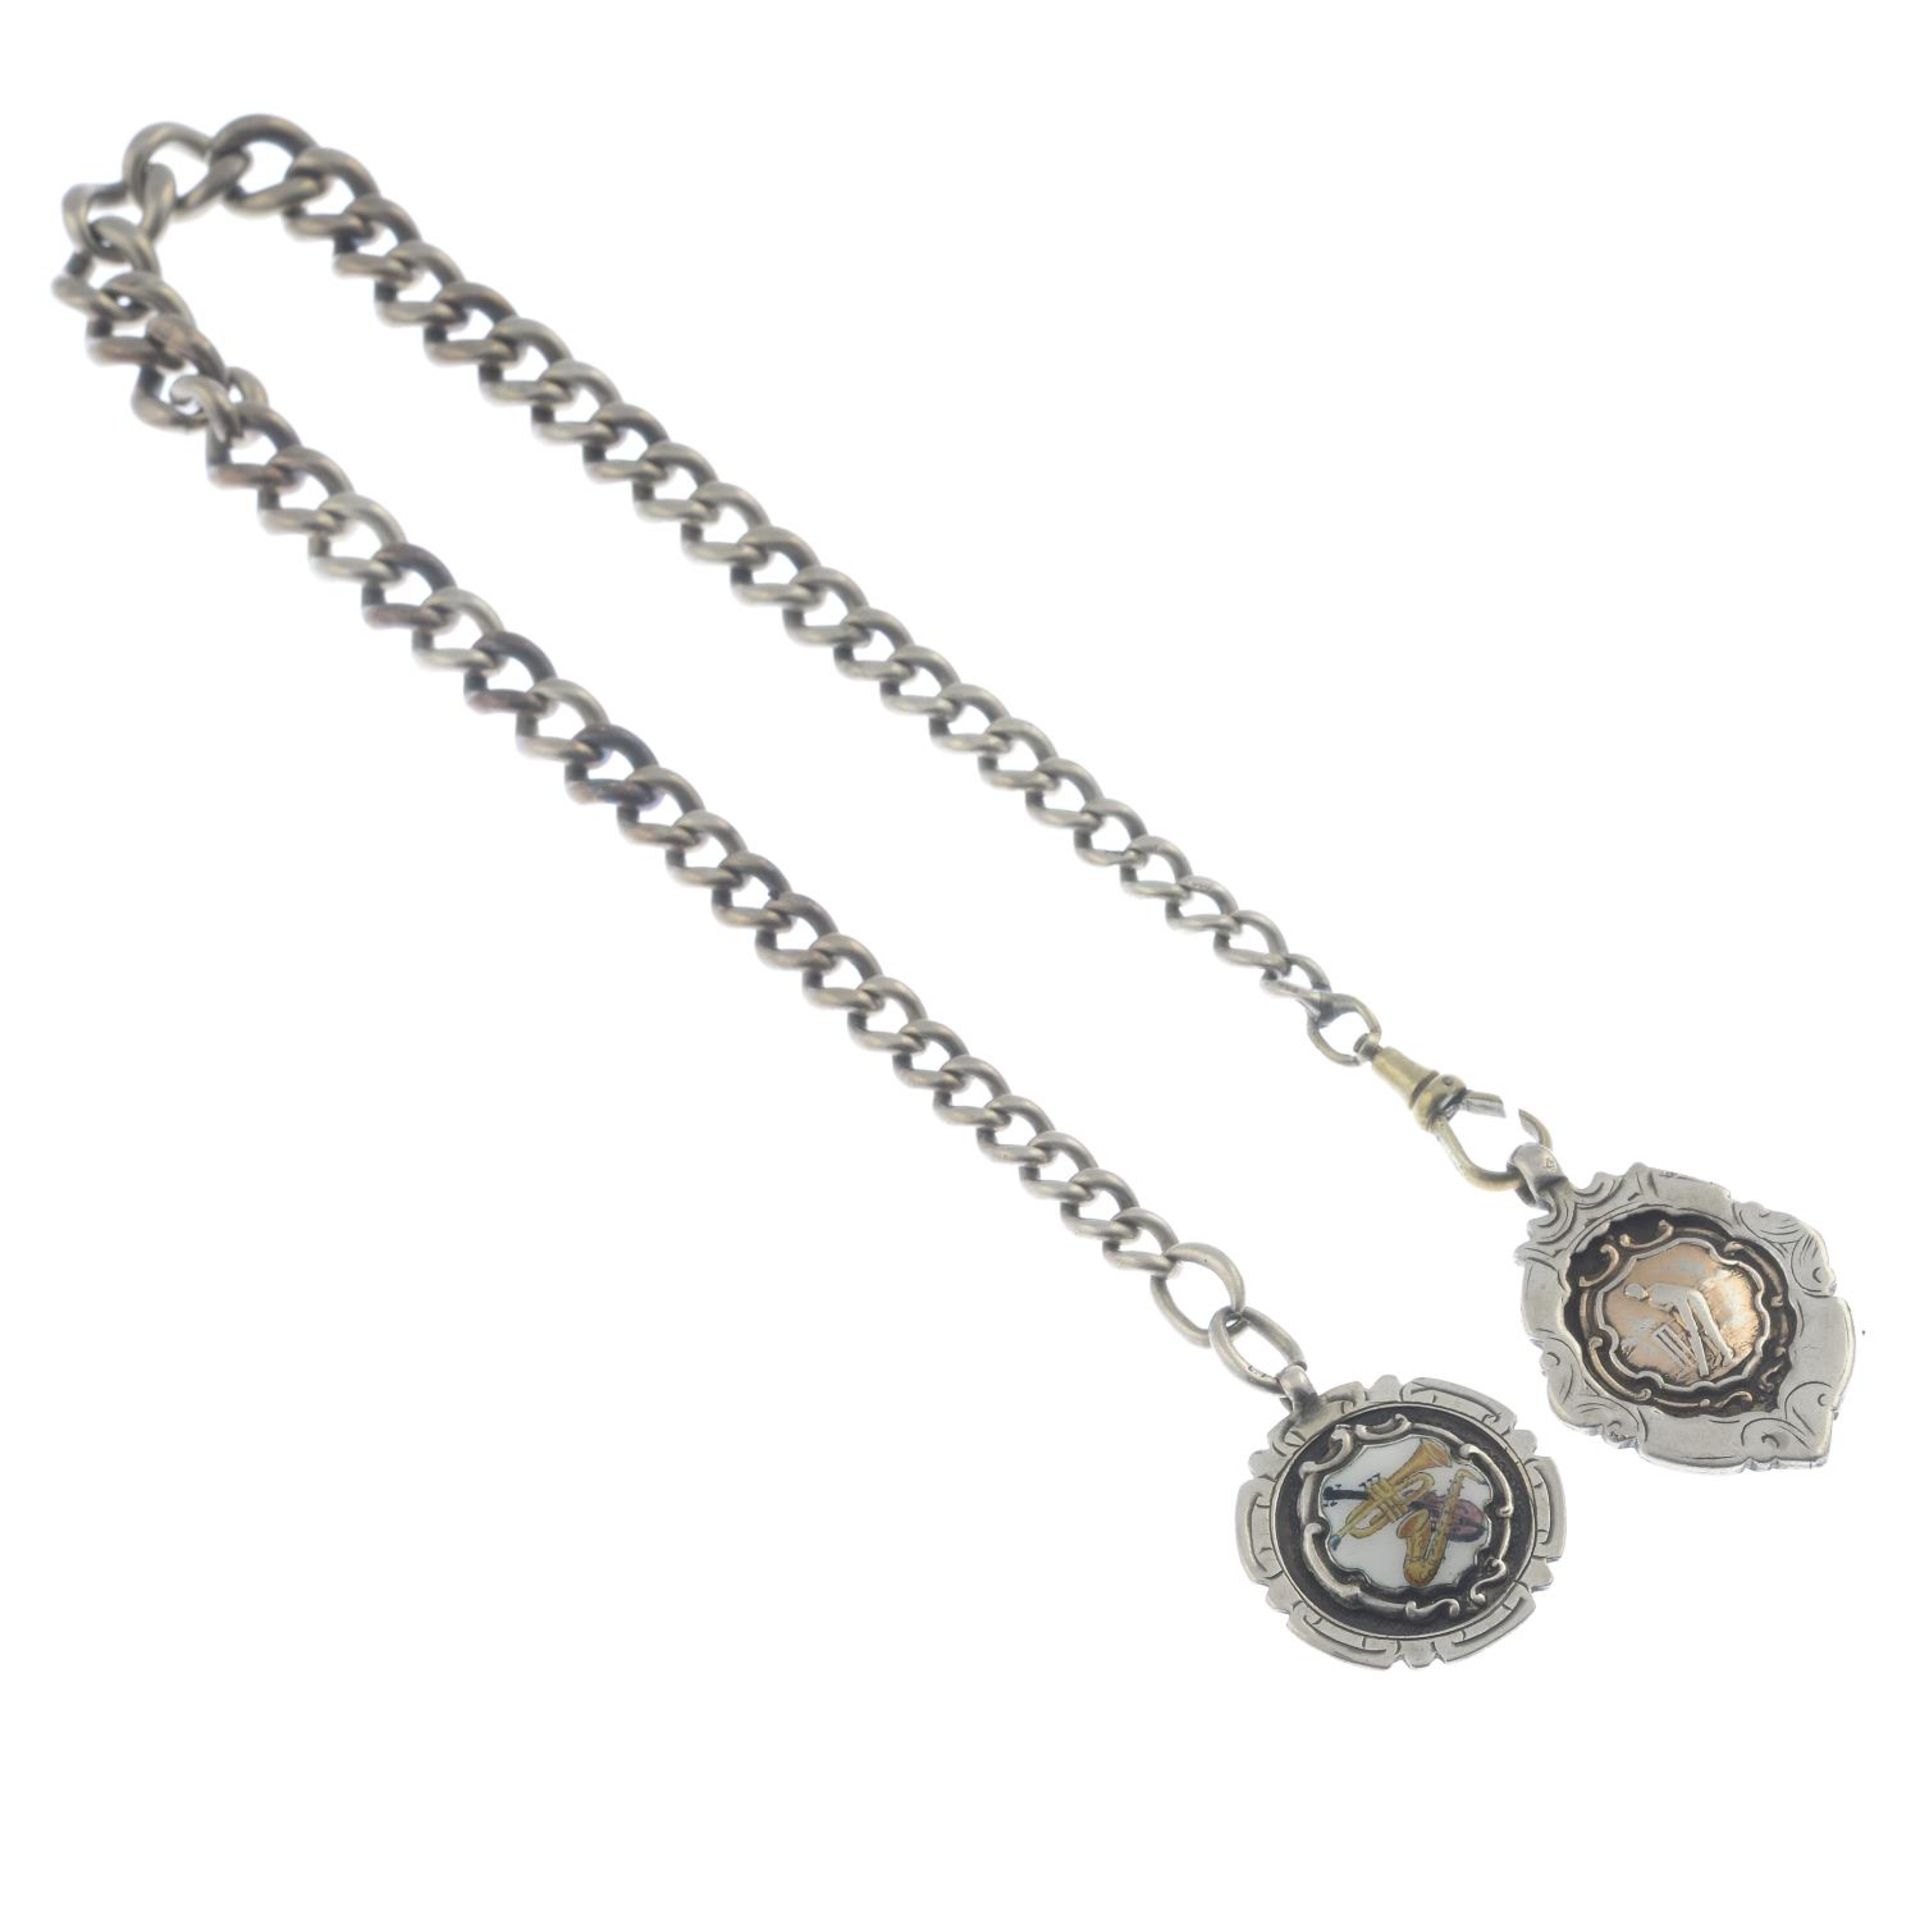 A Victorian silver albert chain and two fobs.